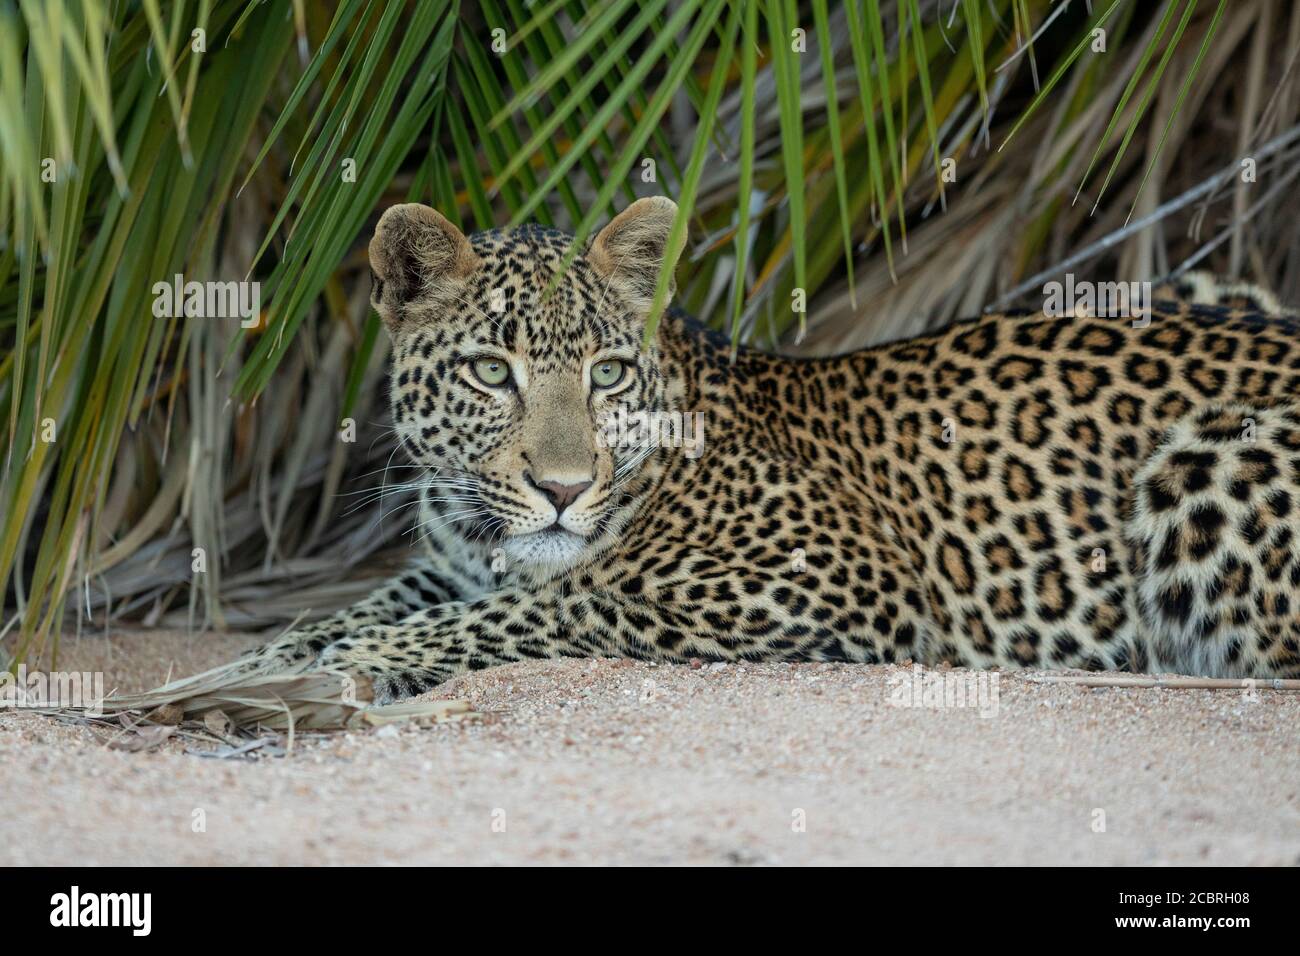 Adult leopard with beautiful green eyes lying down in the shade of a palm tree in Kruger Park South Africa Stock Photo